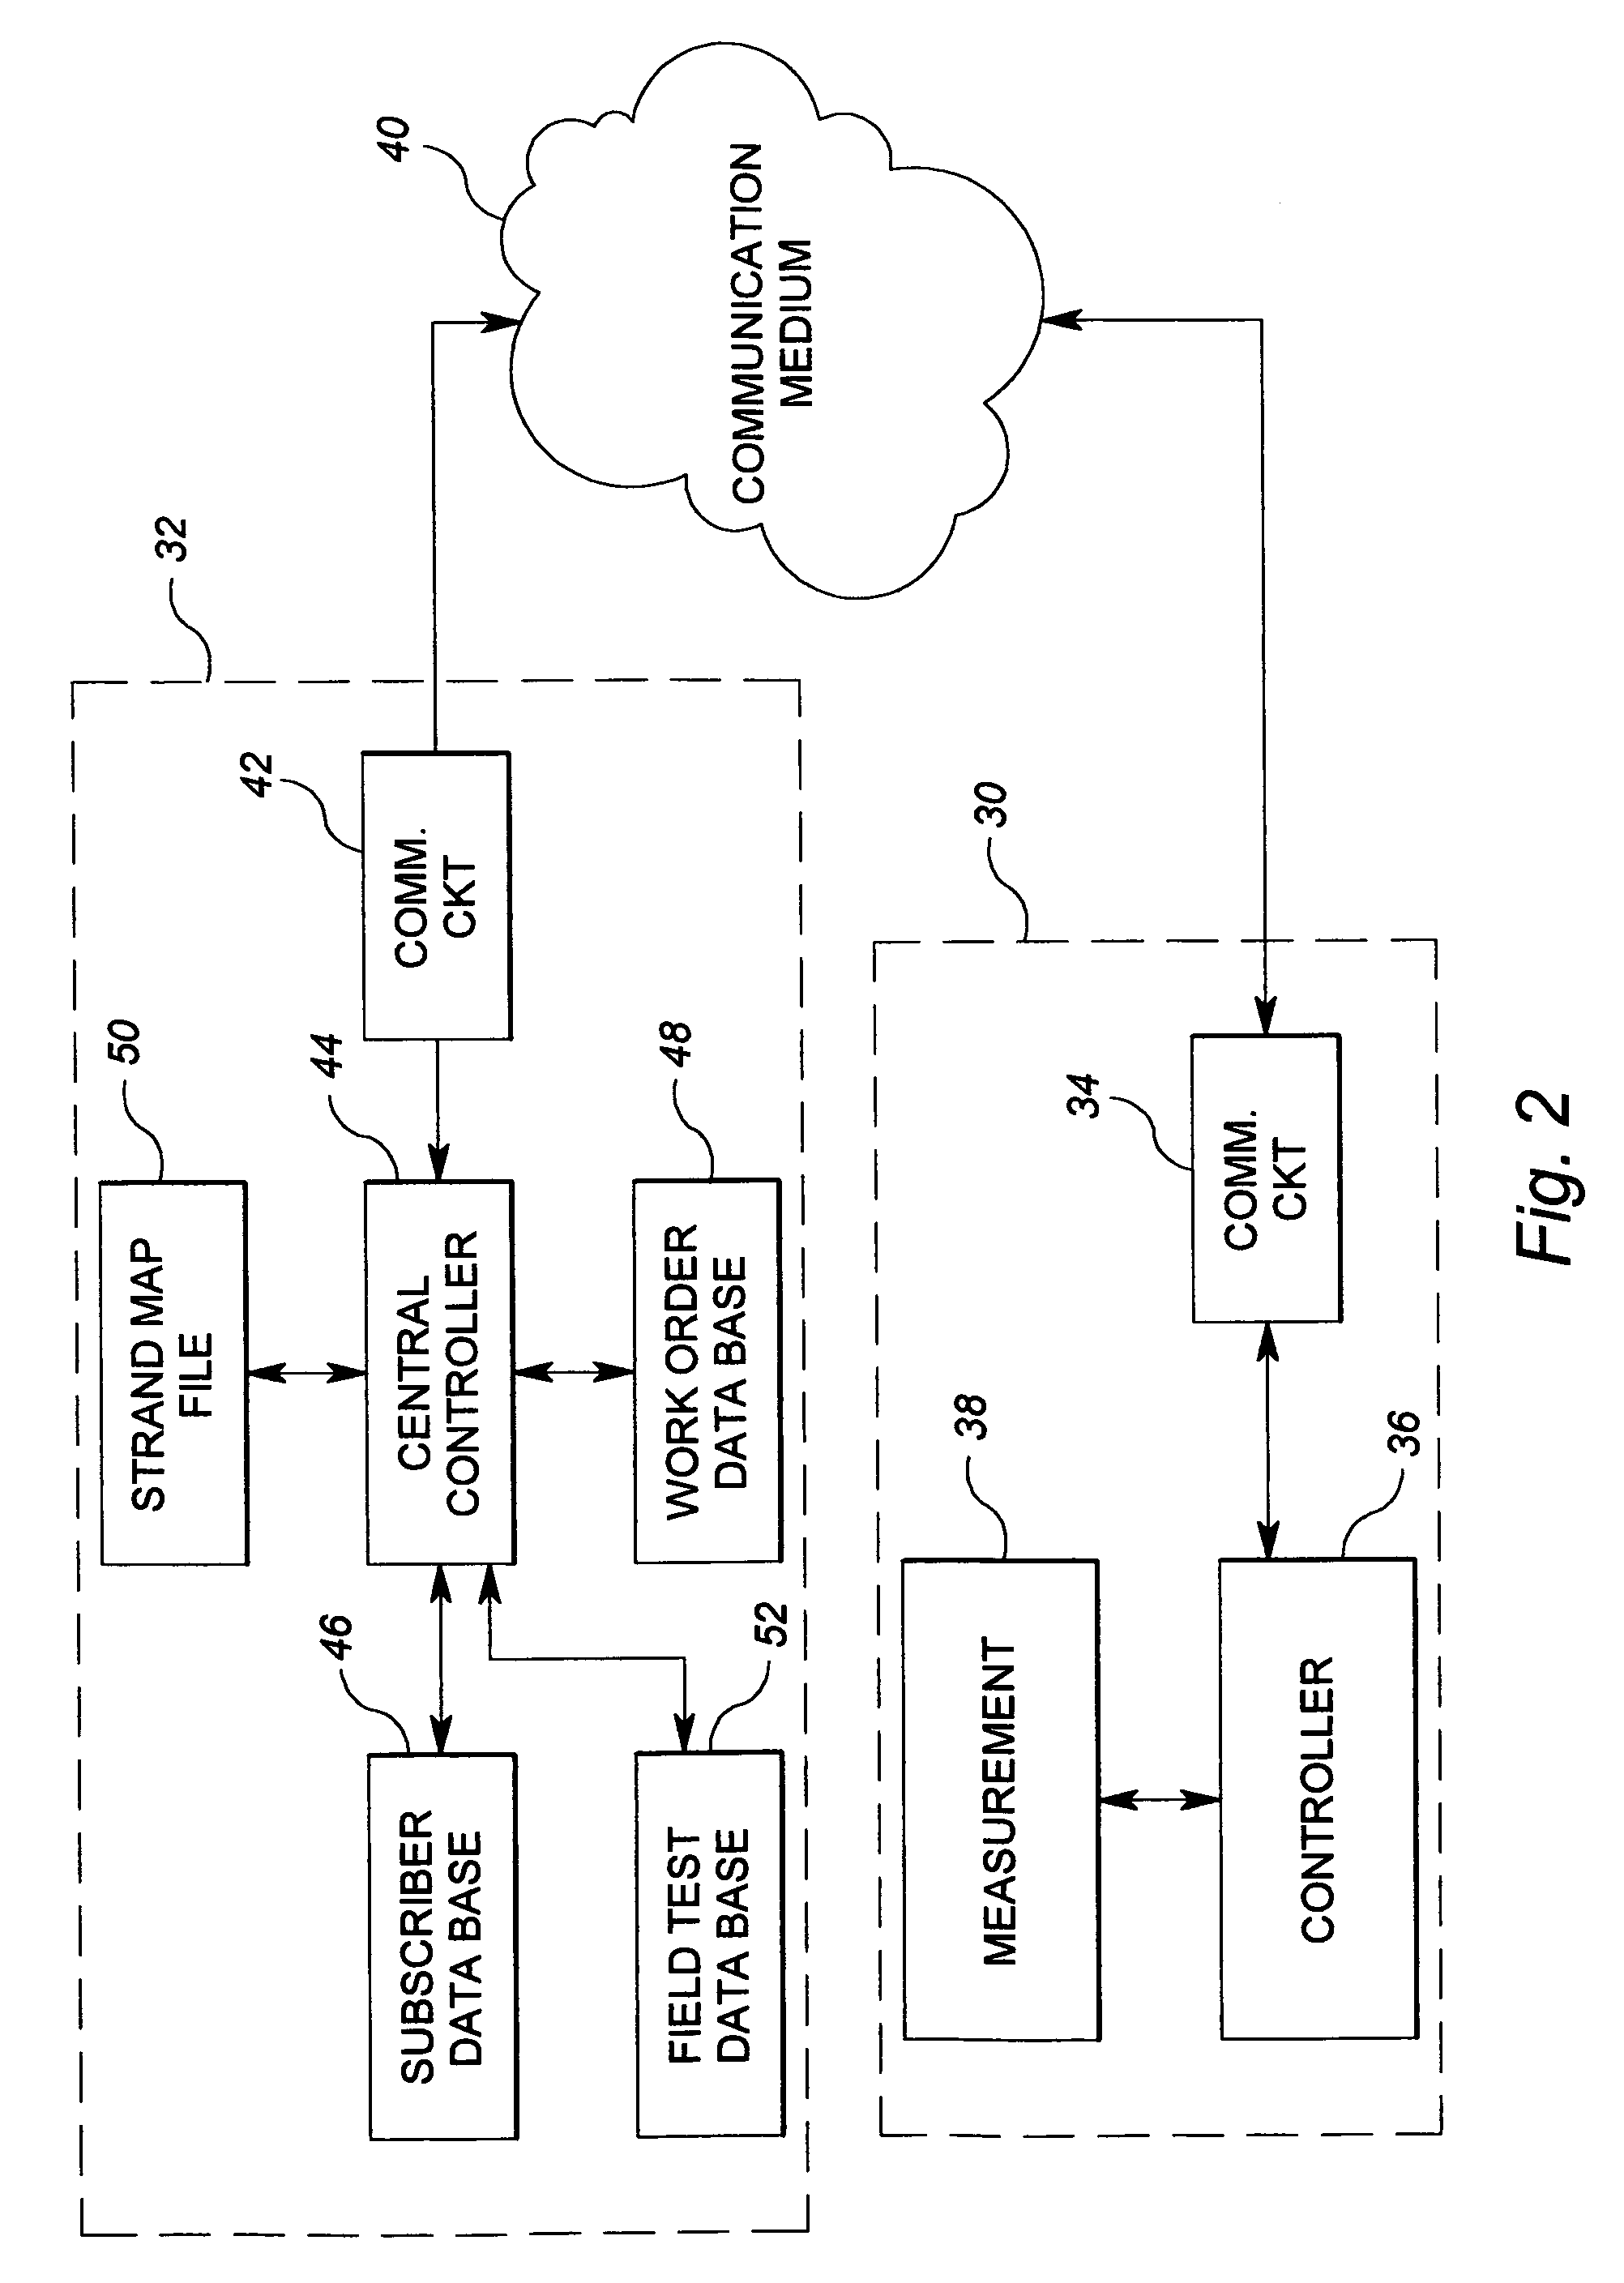 Communication system work order performance method and system